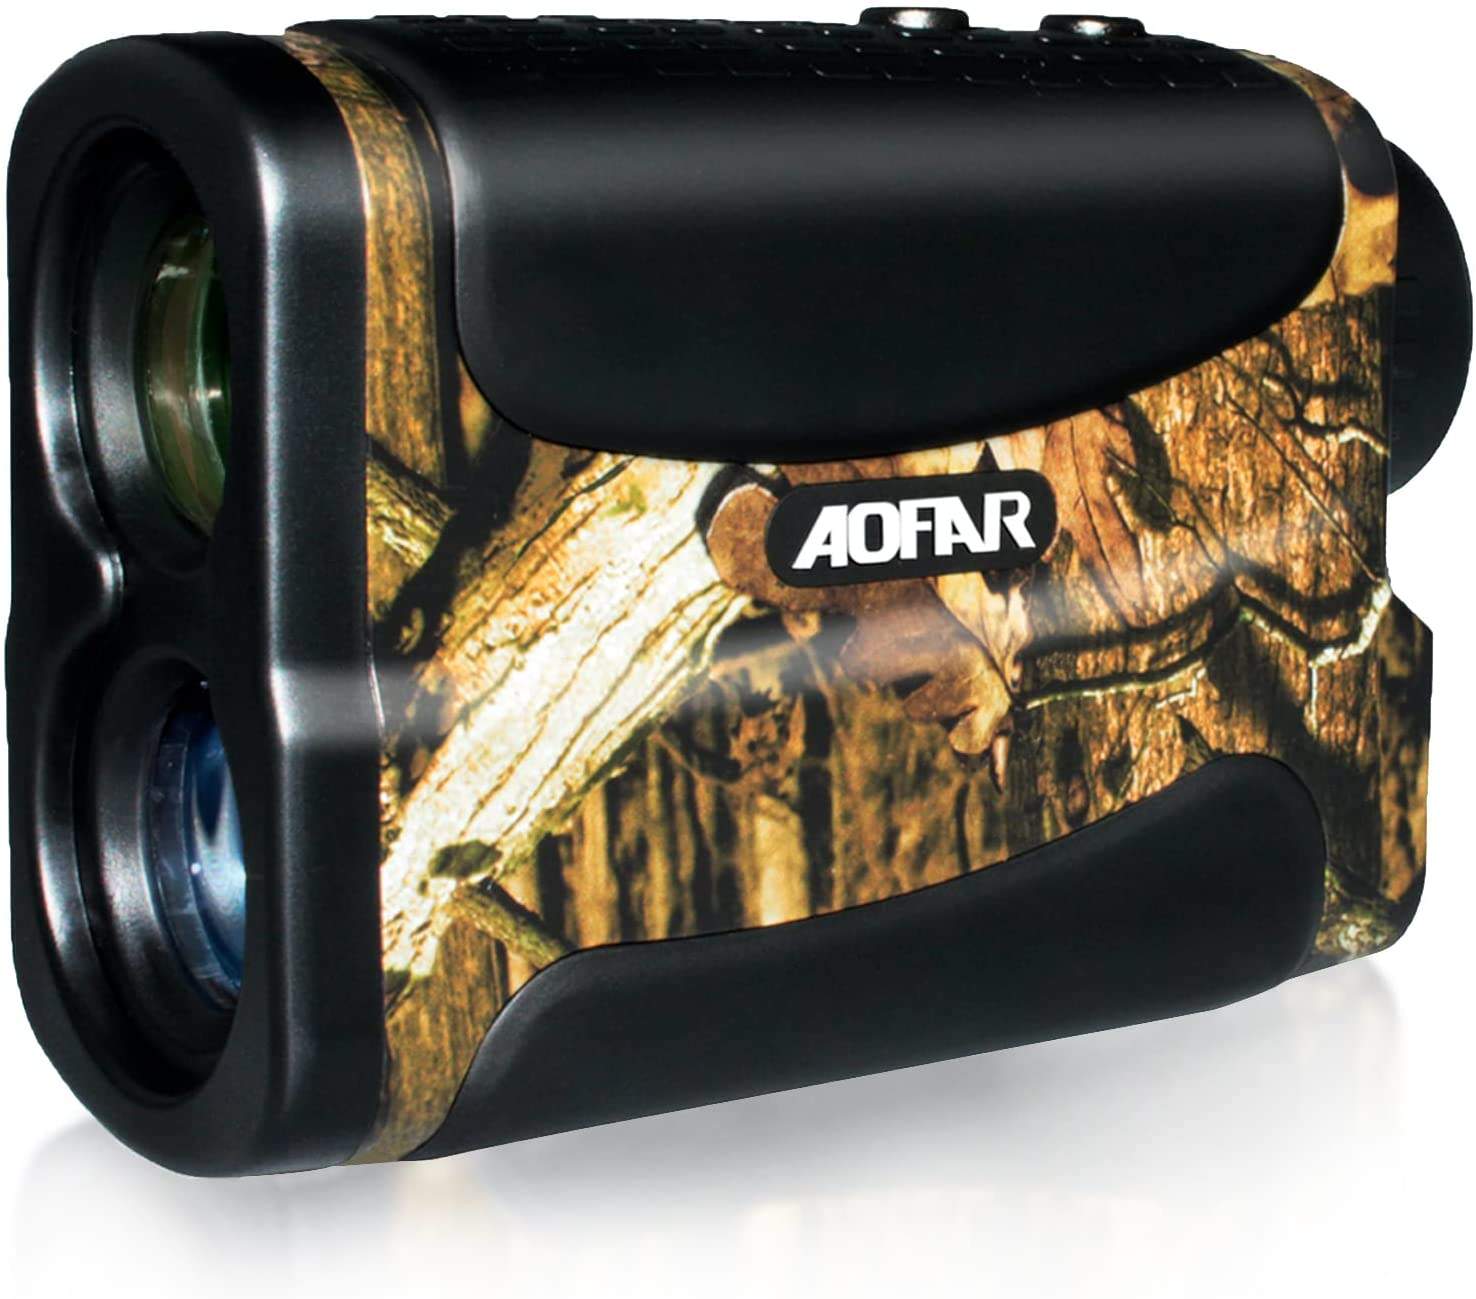 best rangefinder for bowhunting on amazon